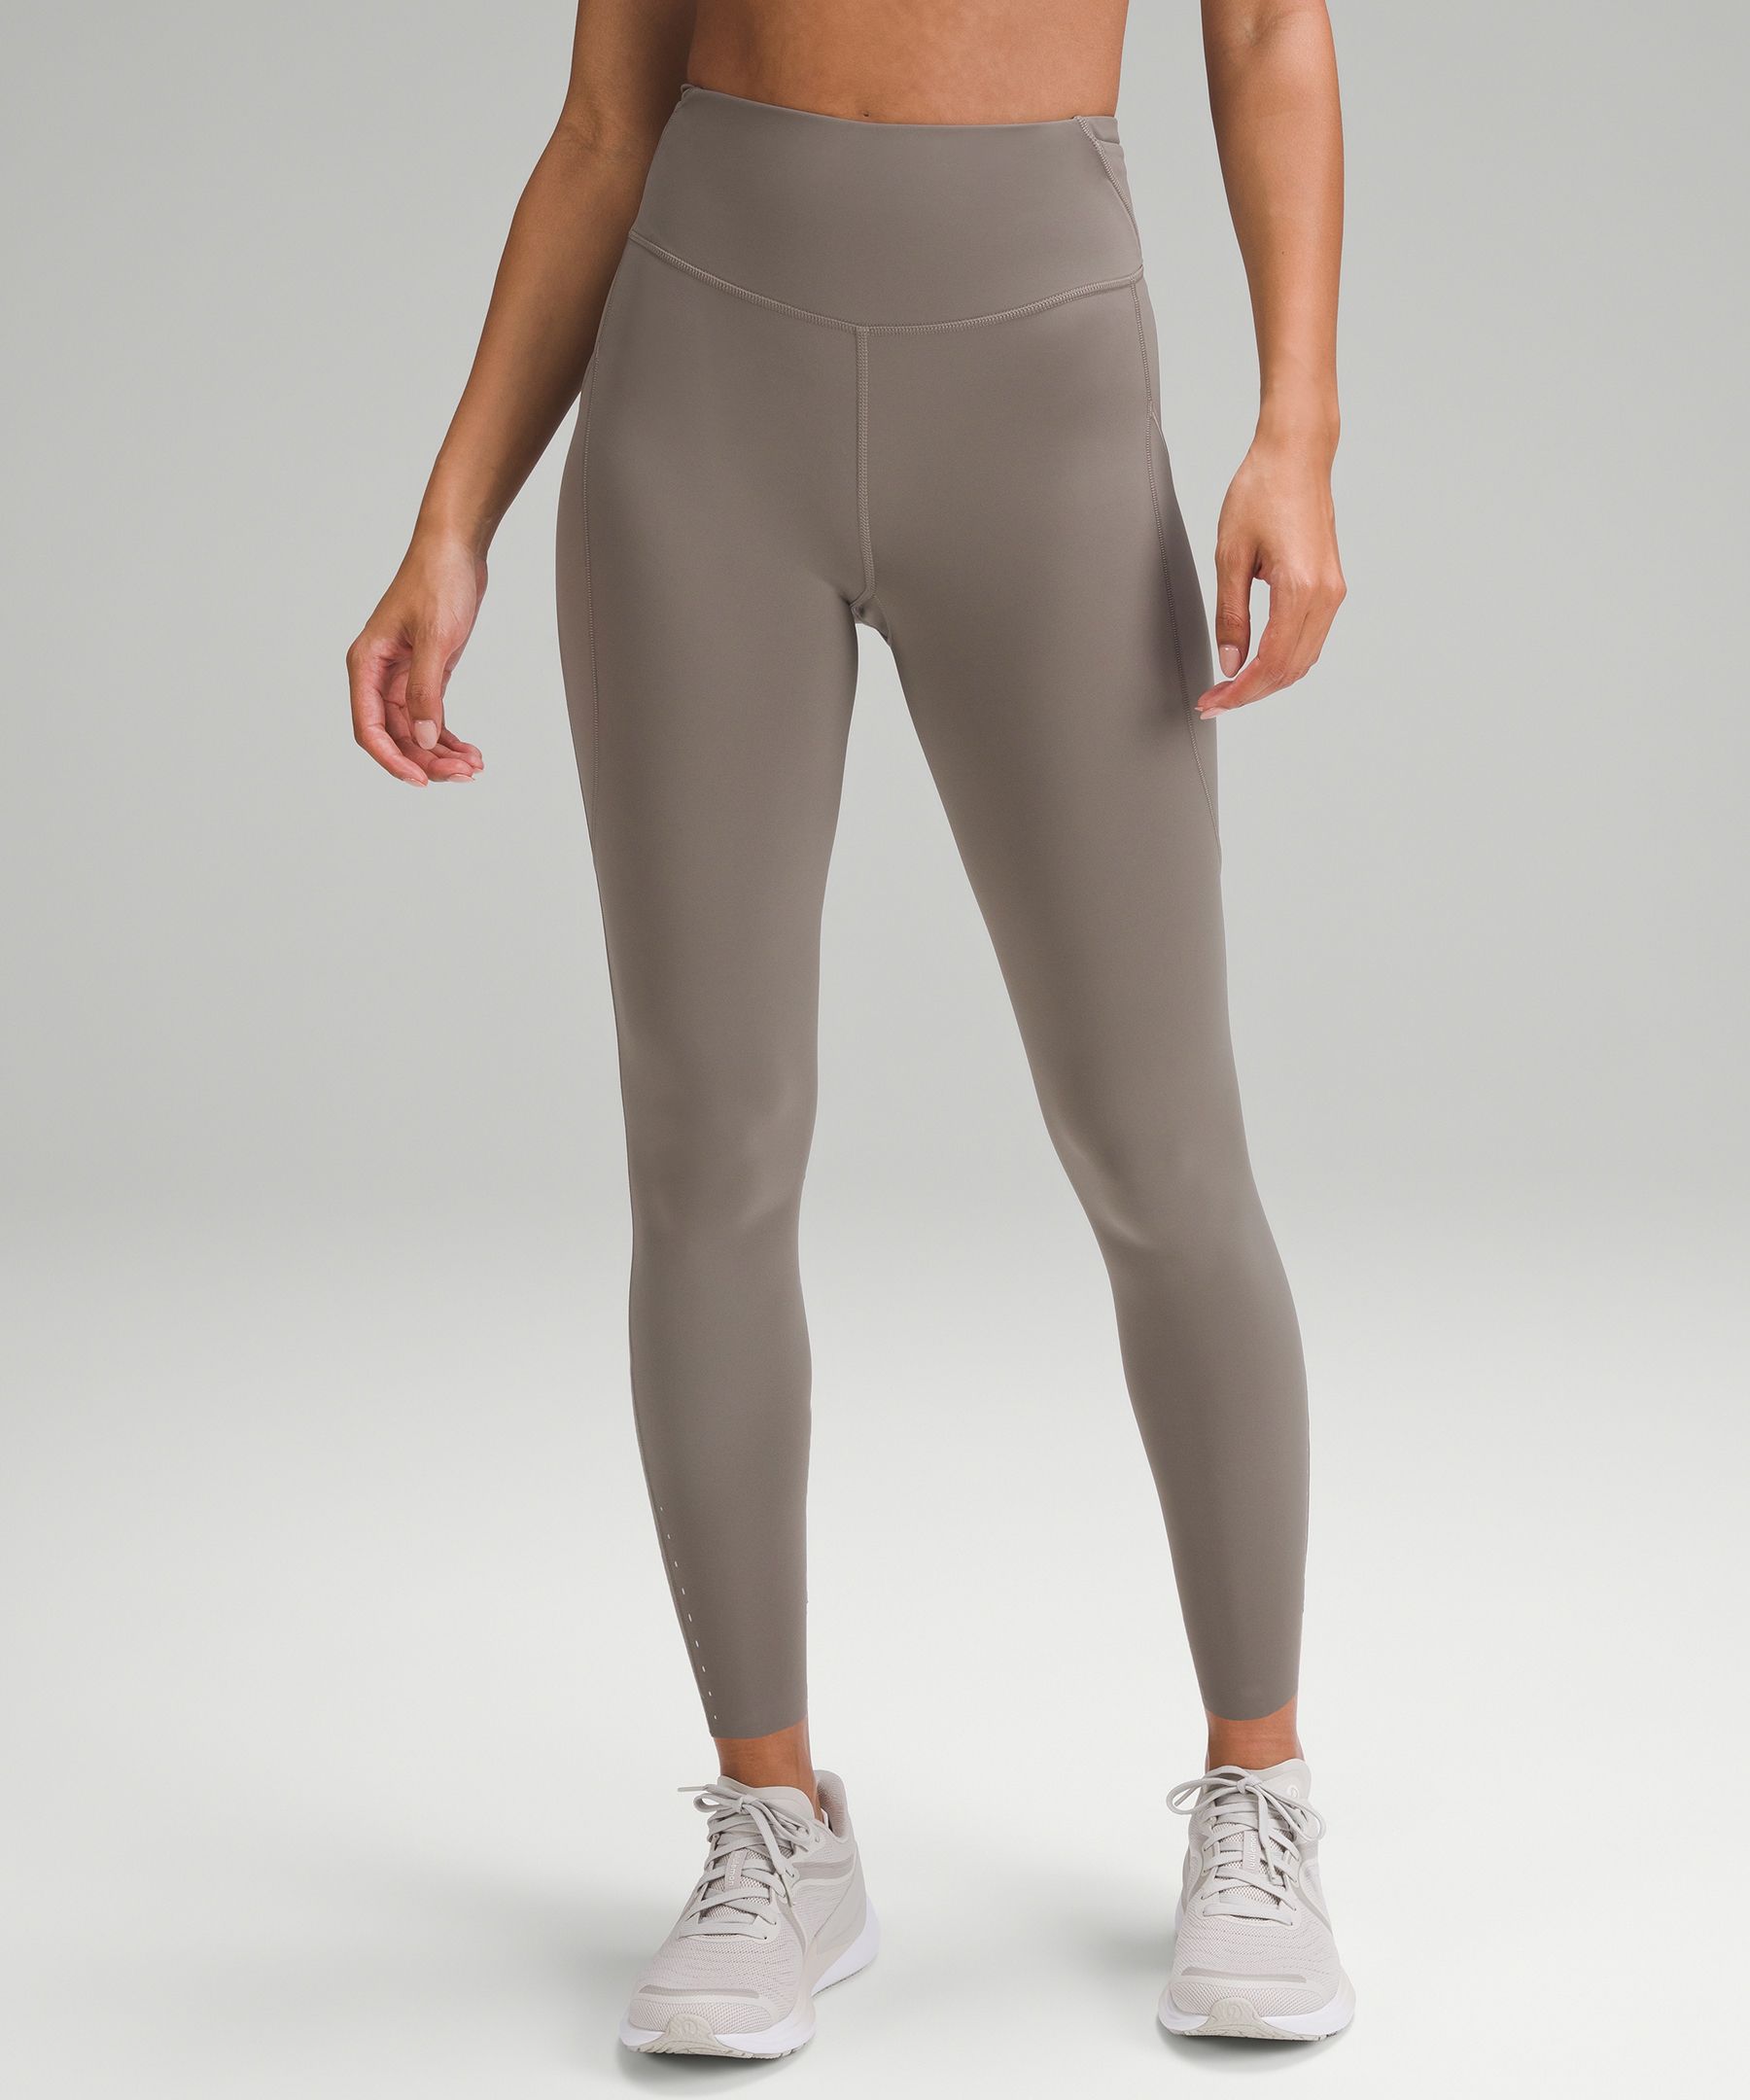 Fast and Free High-Rise Tight 25” Pockets *Updated | Women's Leggings ...